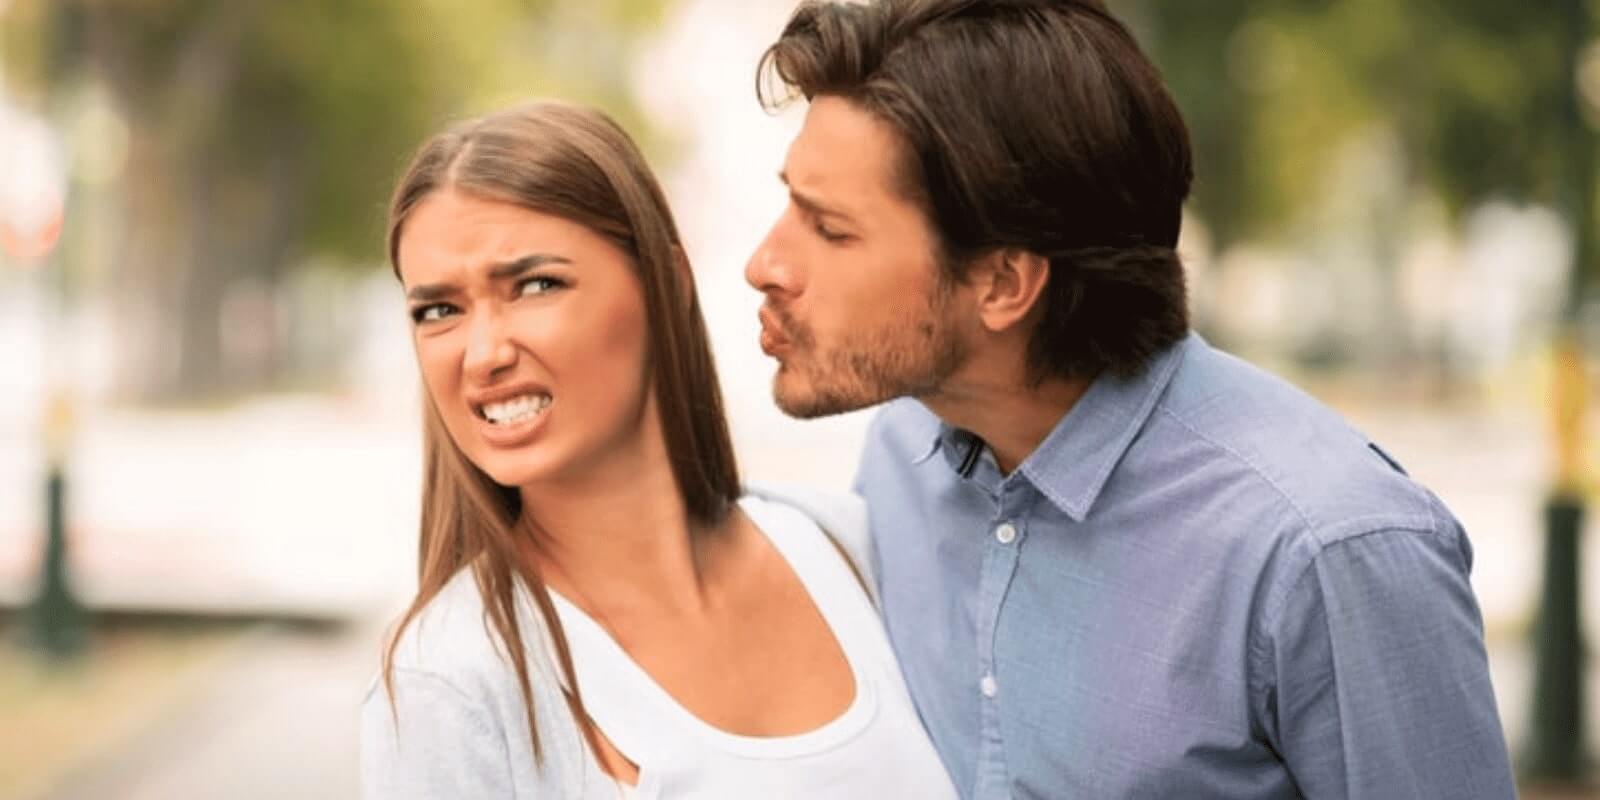 A woman looking disgusted when her partner tries to kiss her